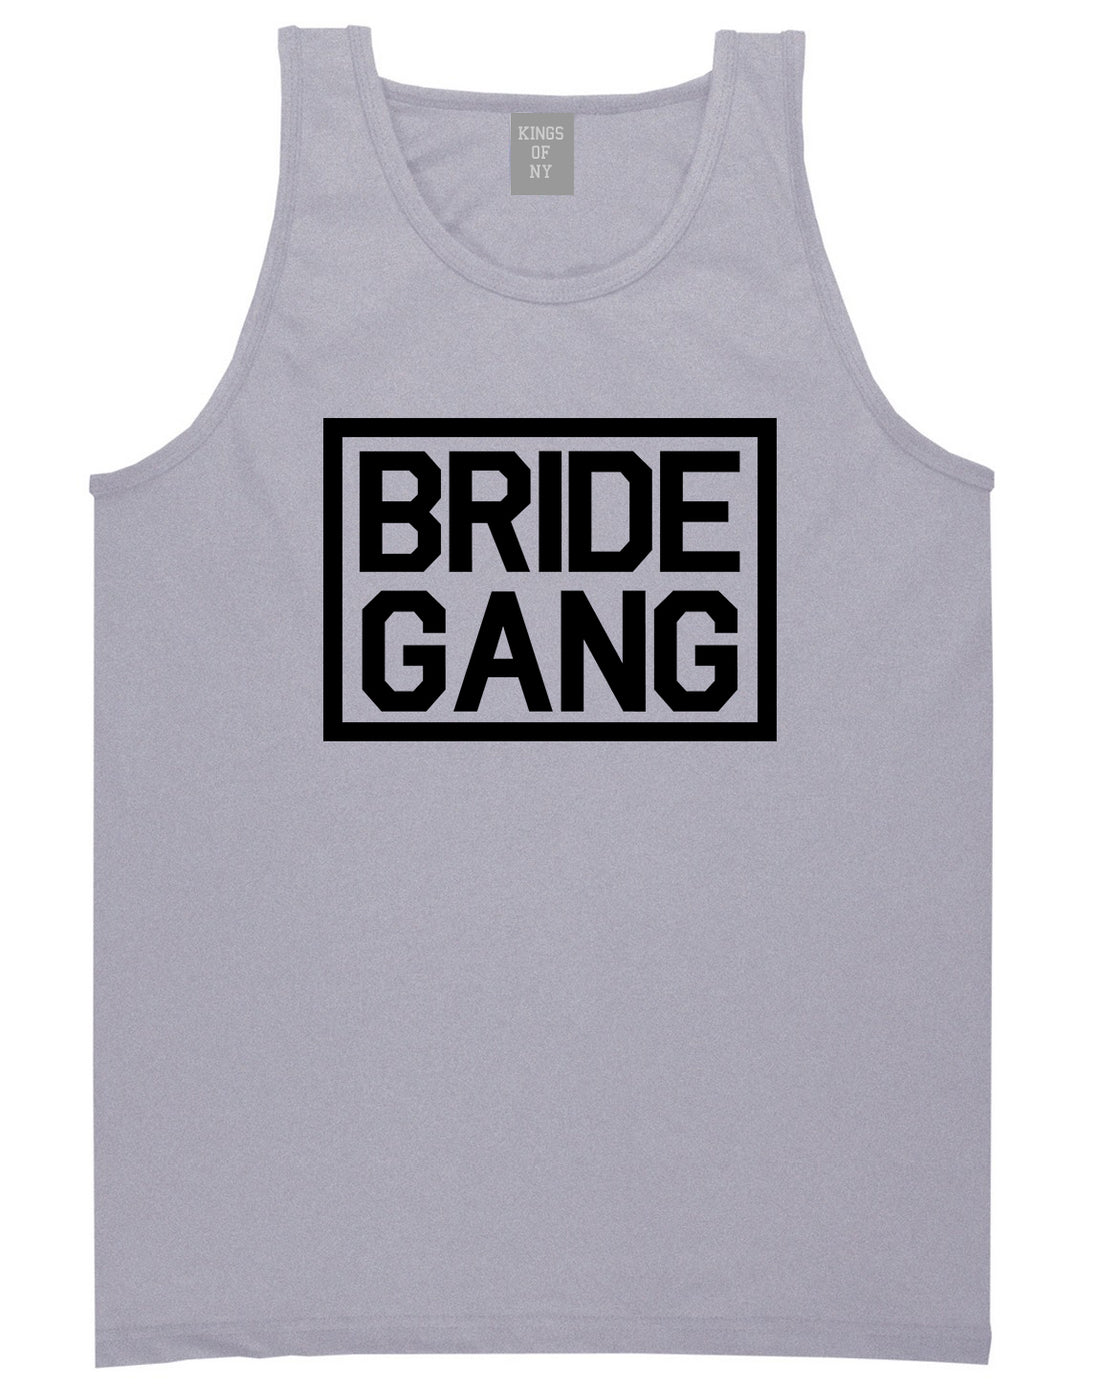 Bride Gang Bachlorette Party Grey Tank Top Shirt by Kings Of NY